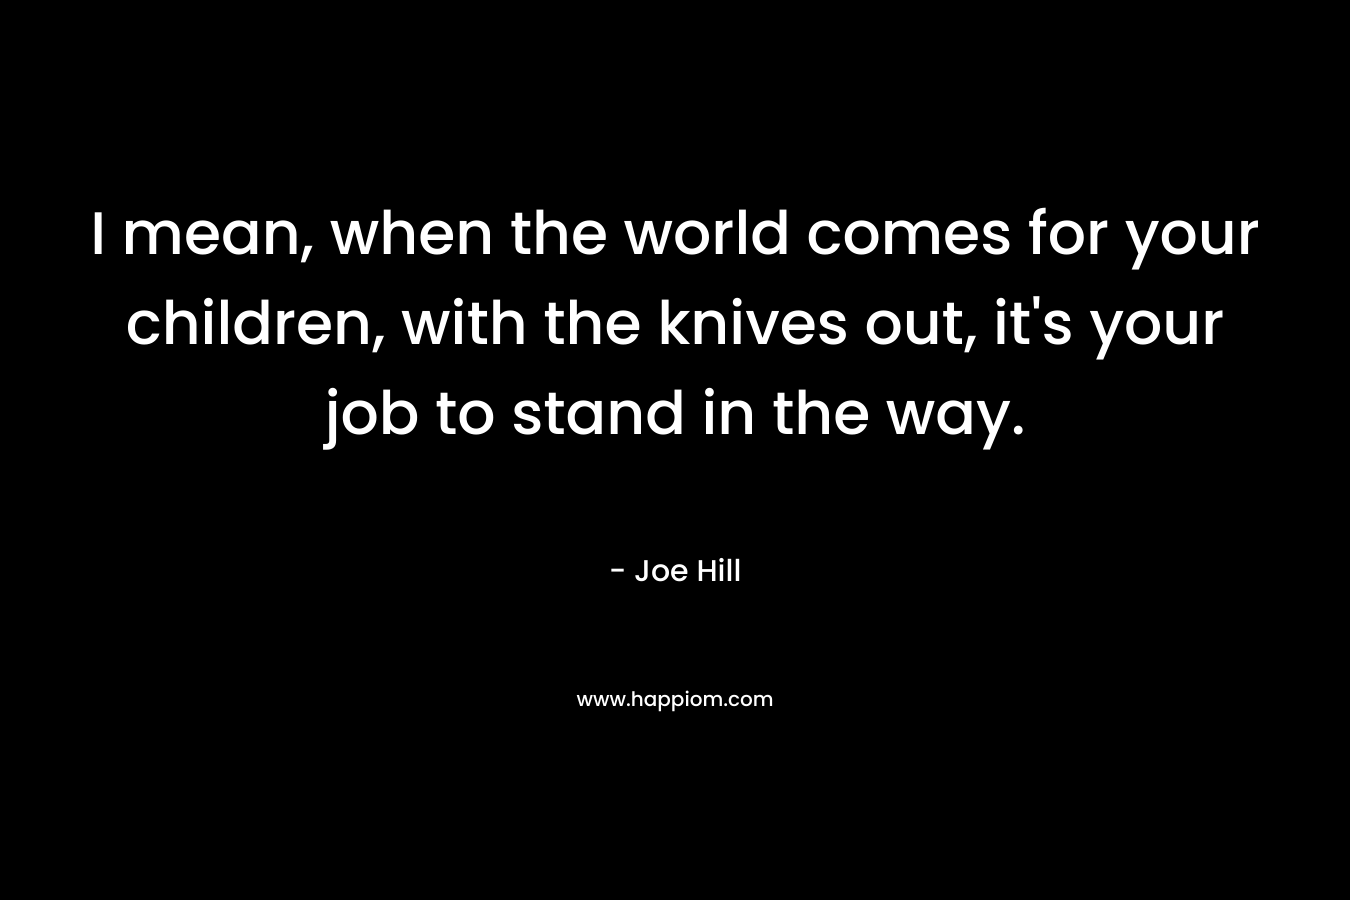 I mean, when the world comes for your children, with the knives out, it's your job to stand in the way.